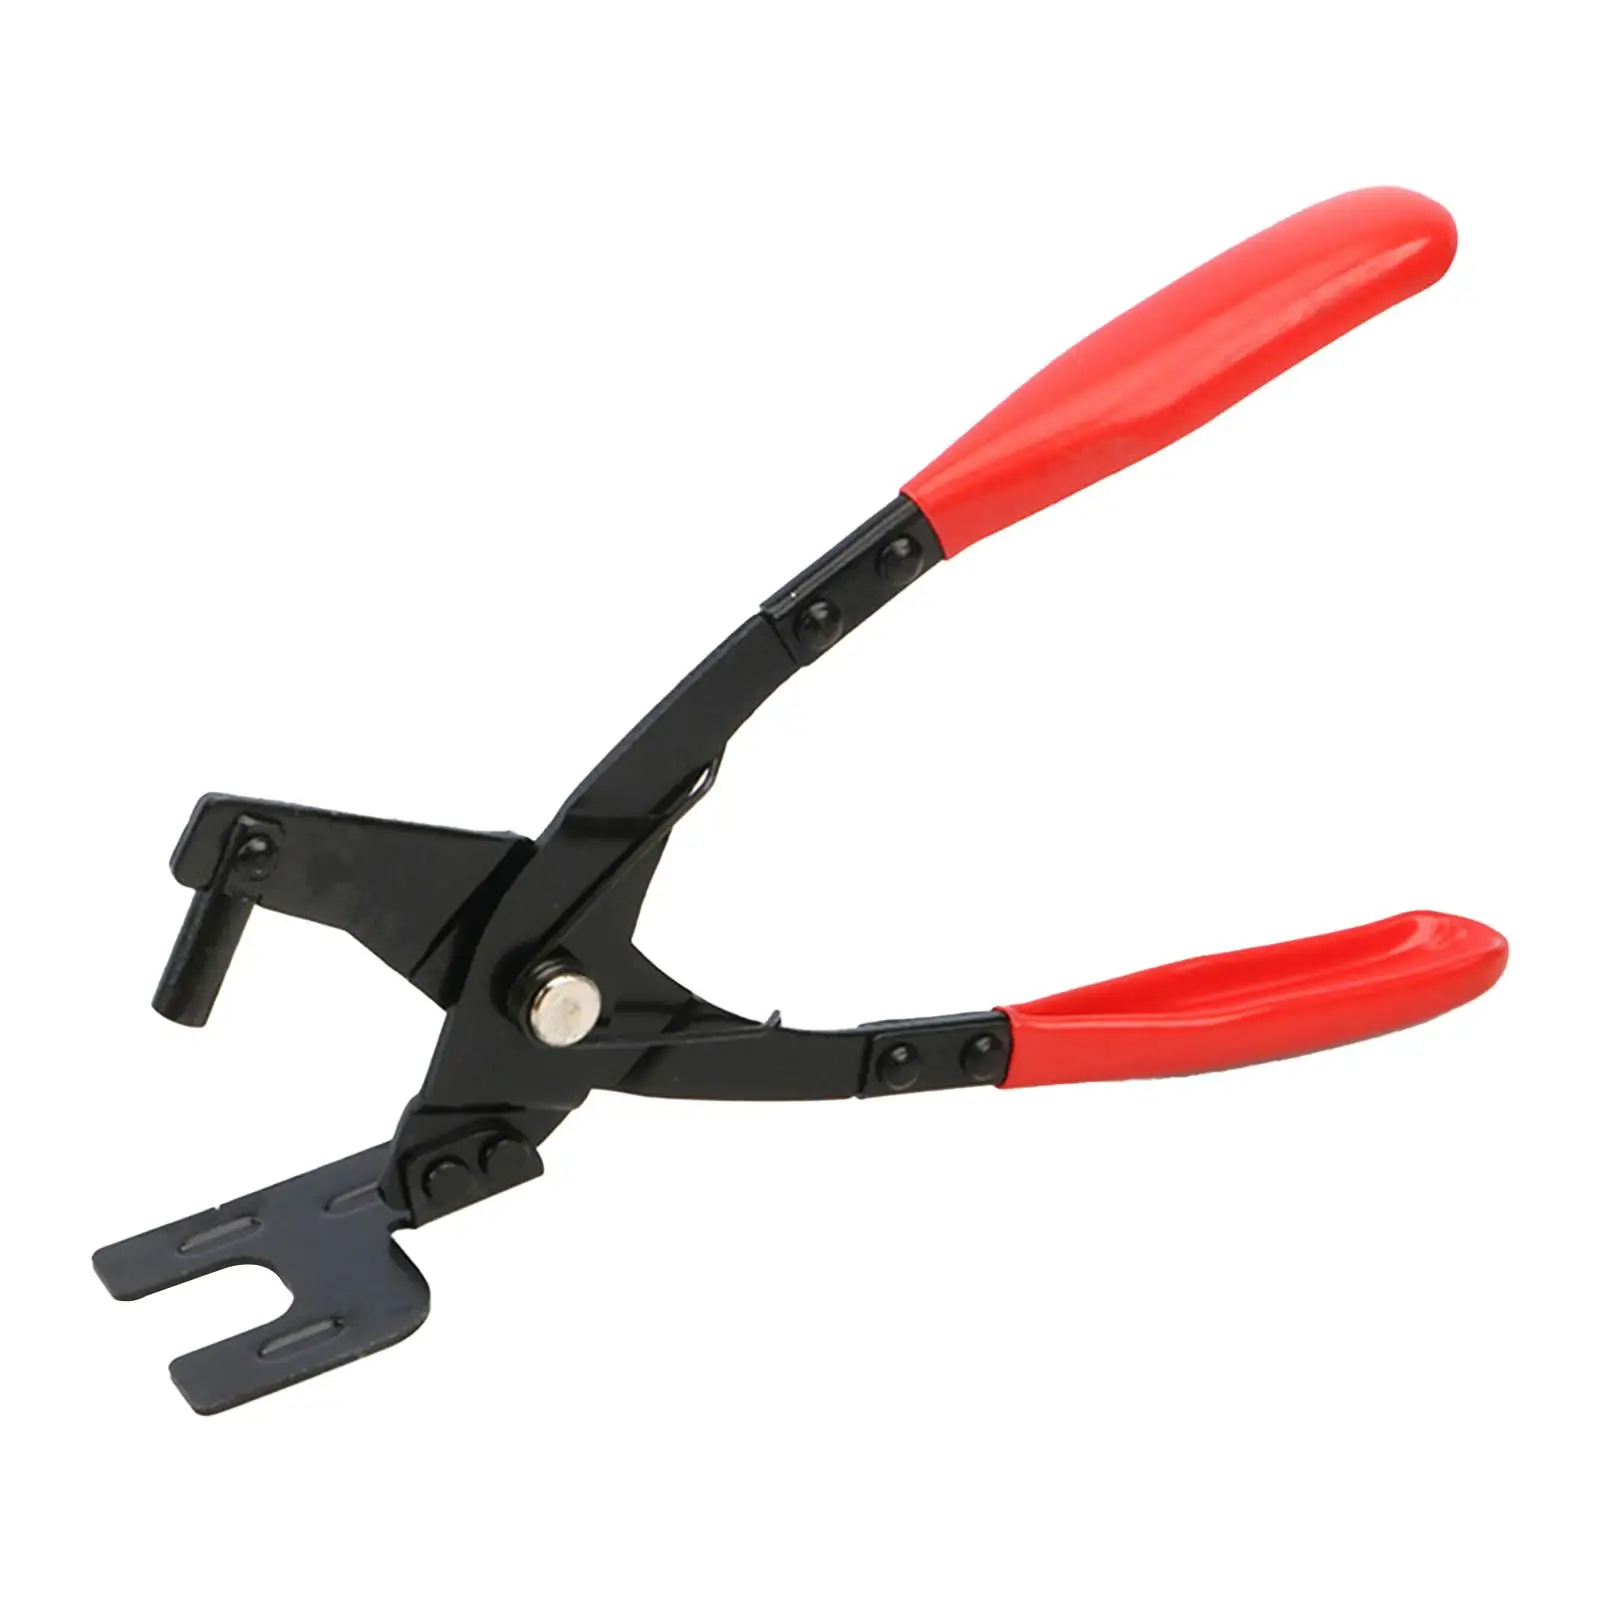 Car Exhaust Hanger Removal Pliers Separates Rubber Supports from Exhaust Hanger Brackets Rubber Exhaust Hanger Removal Tool Red